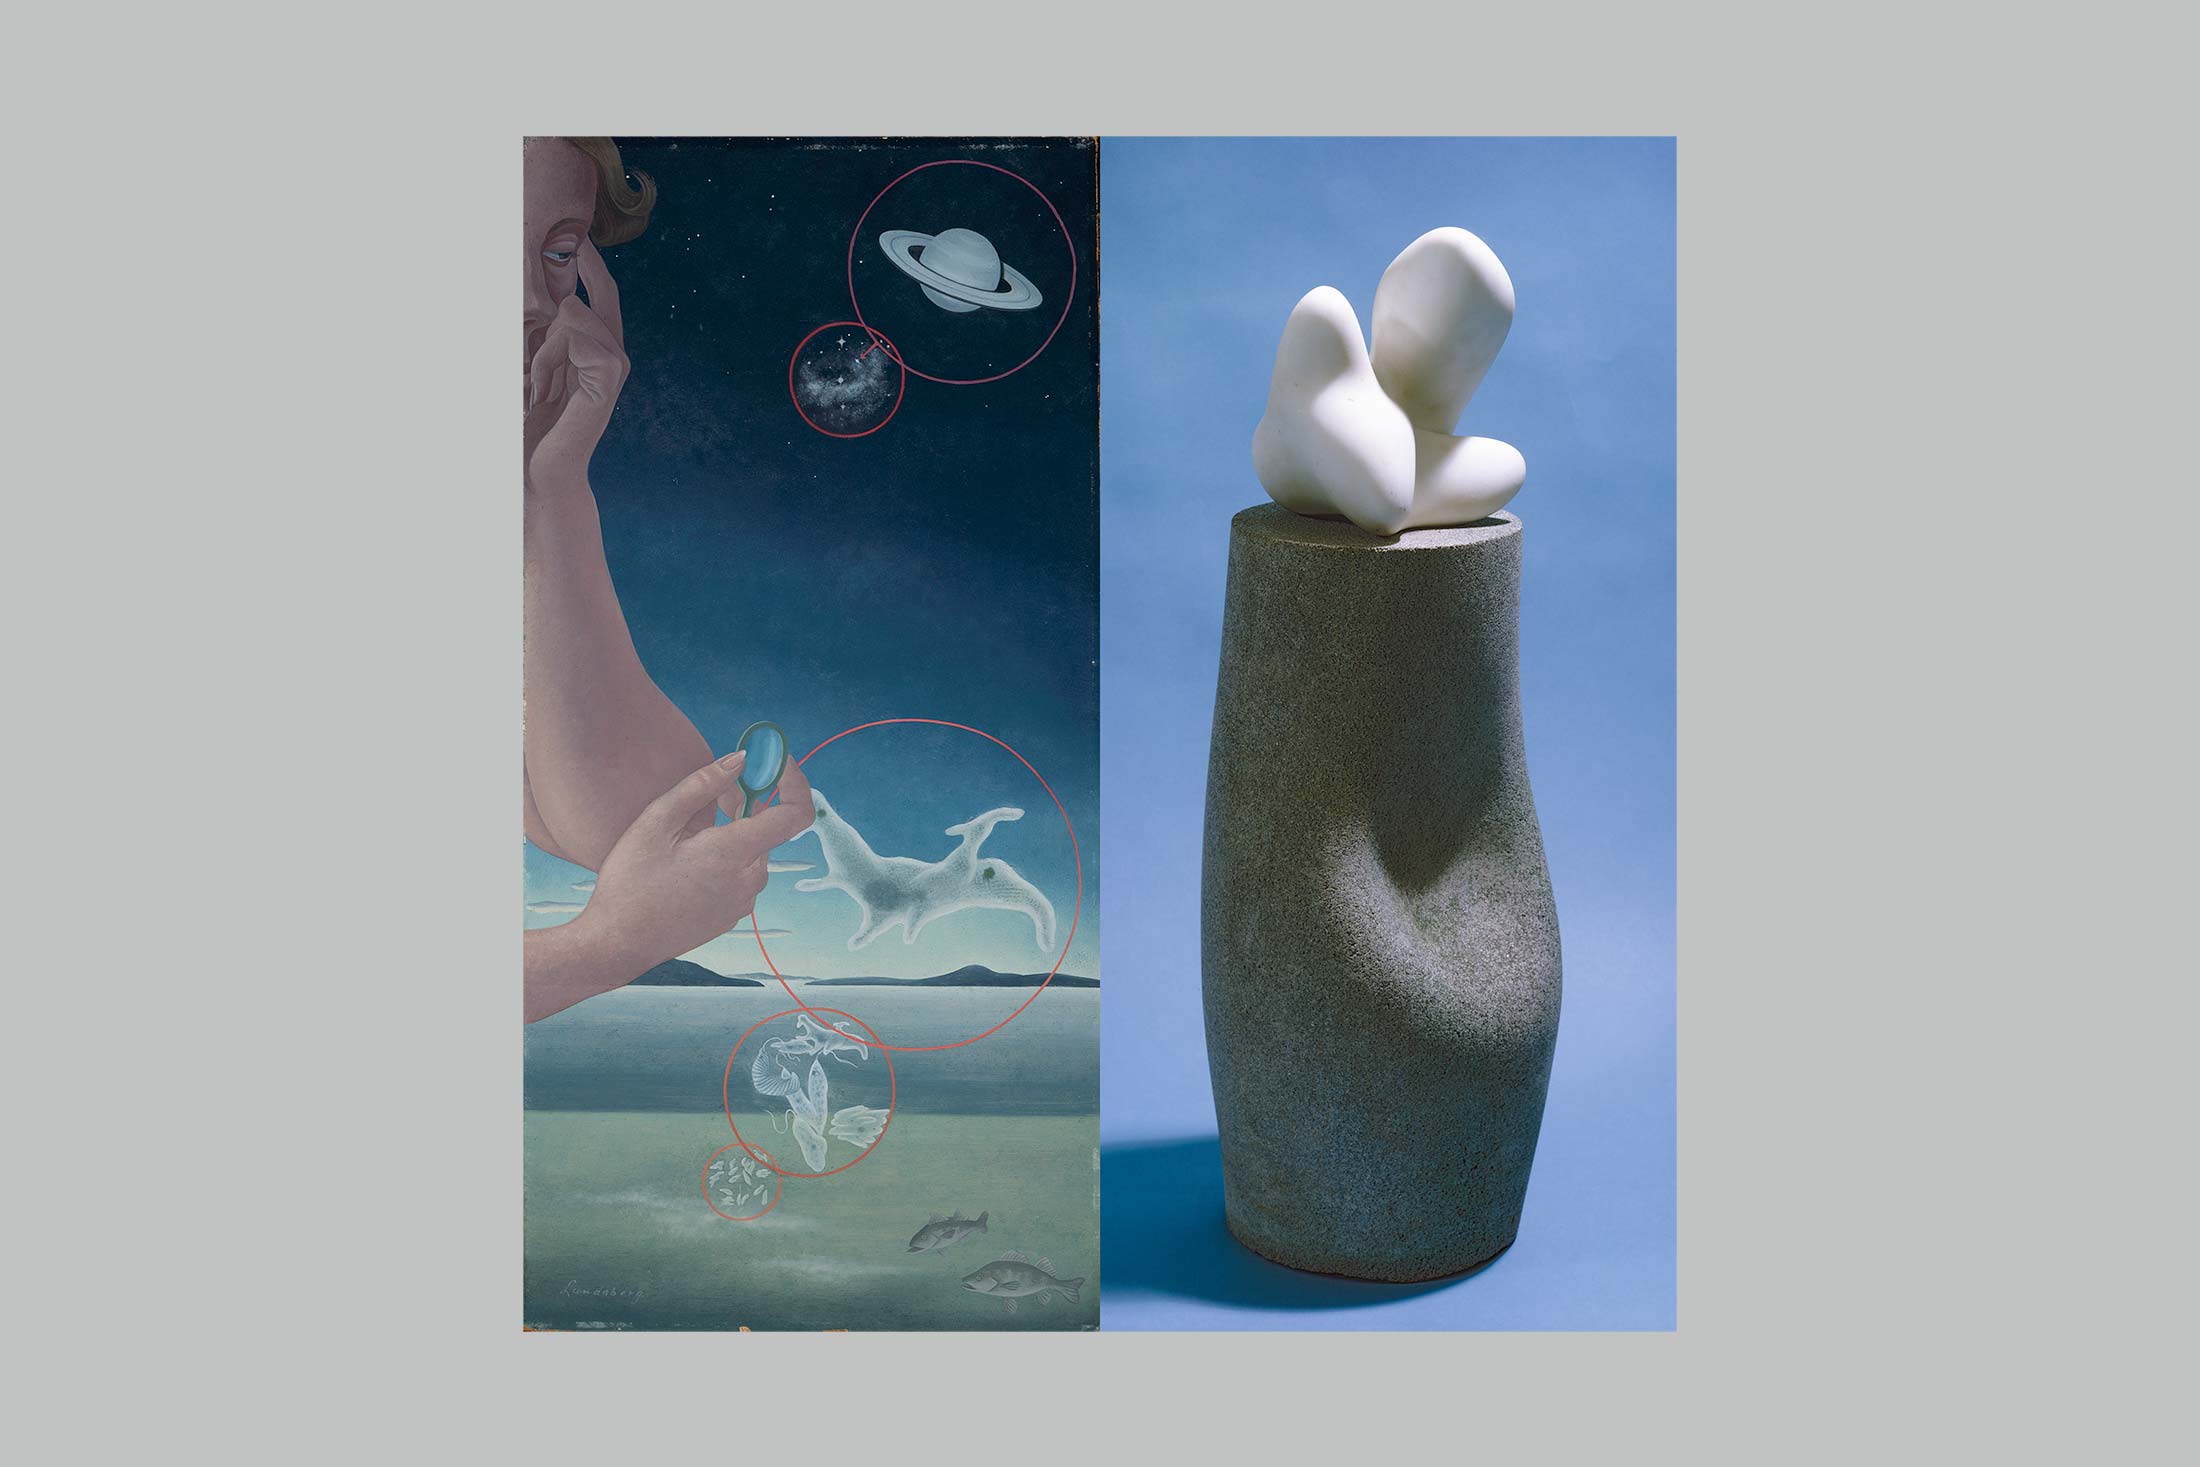 Left: Microcosm and Macrocosm (1937). Helen Lundeberg; Right: Mirr (1936, base 1960), by Jean Arp. Sirató